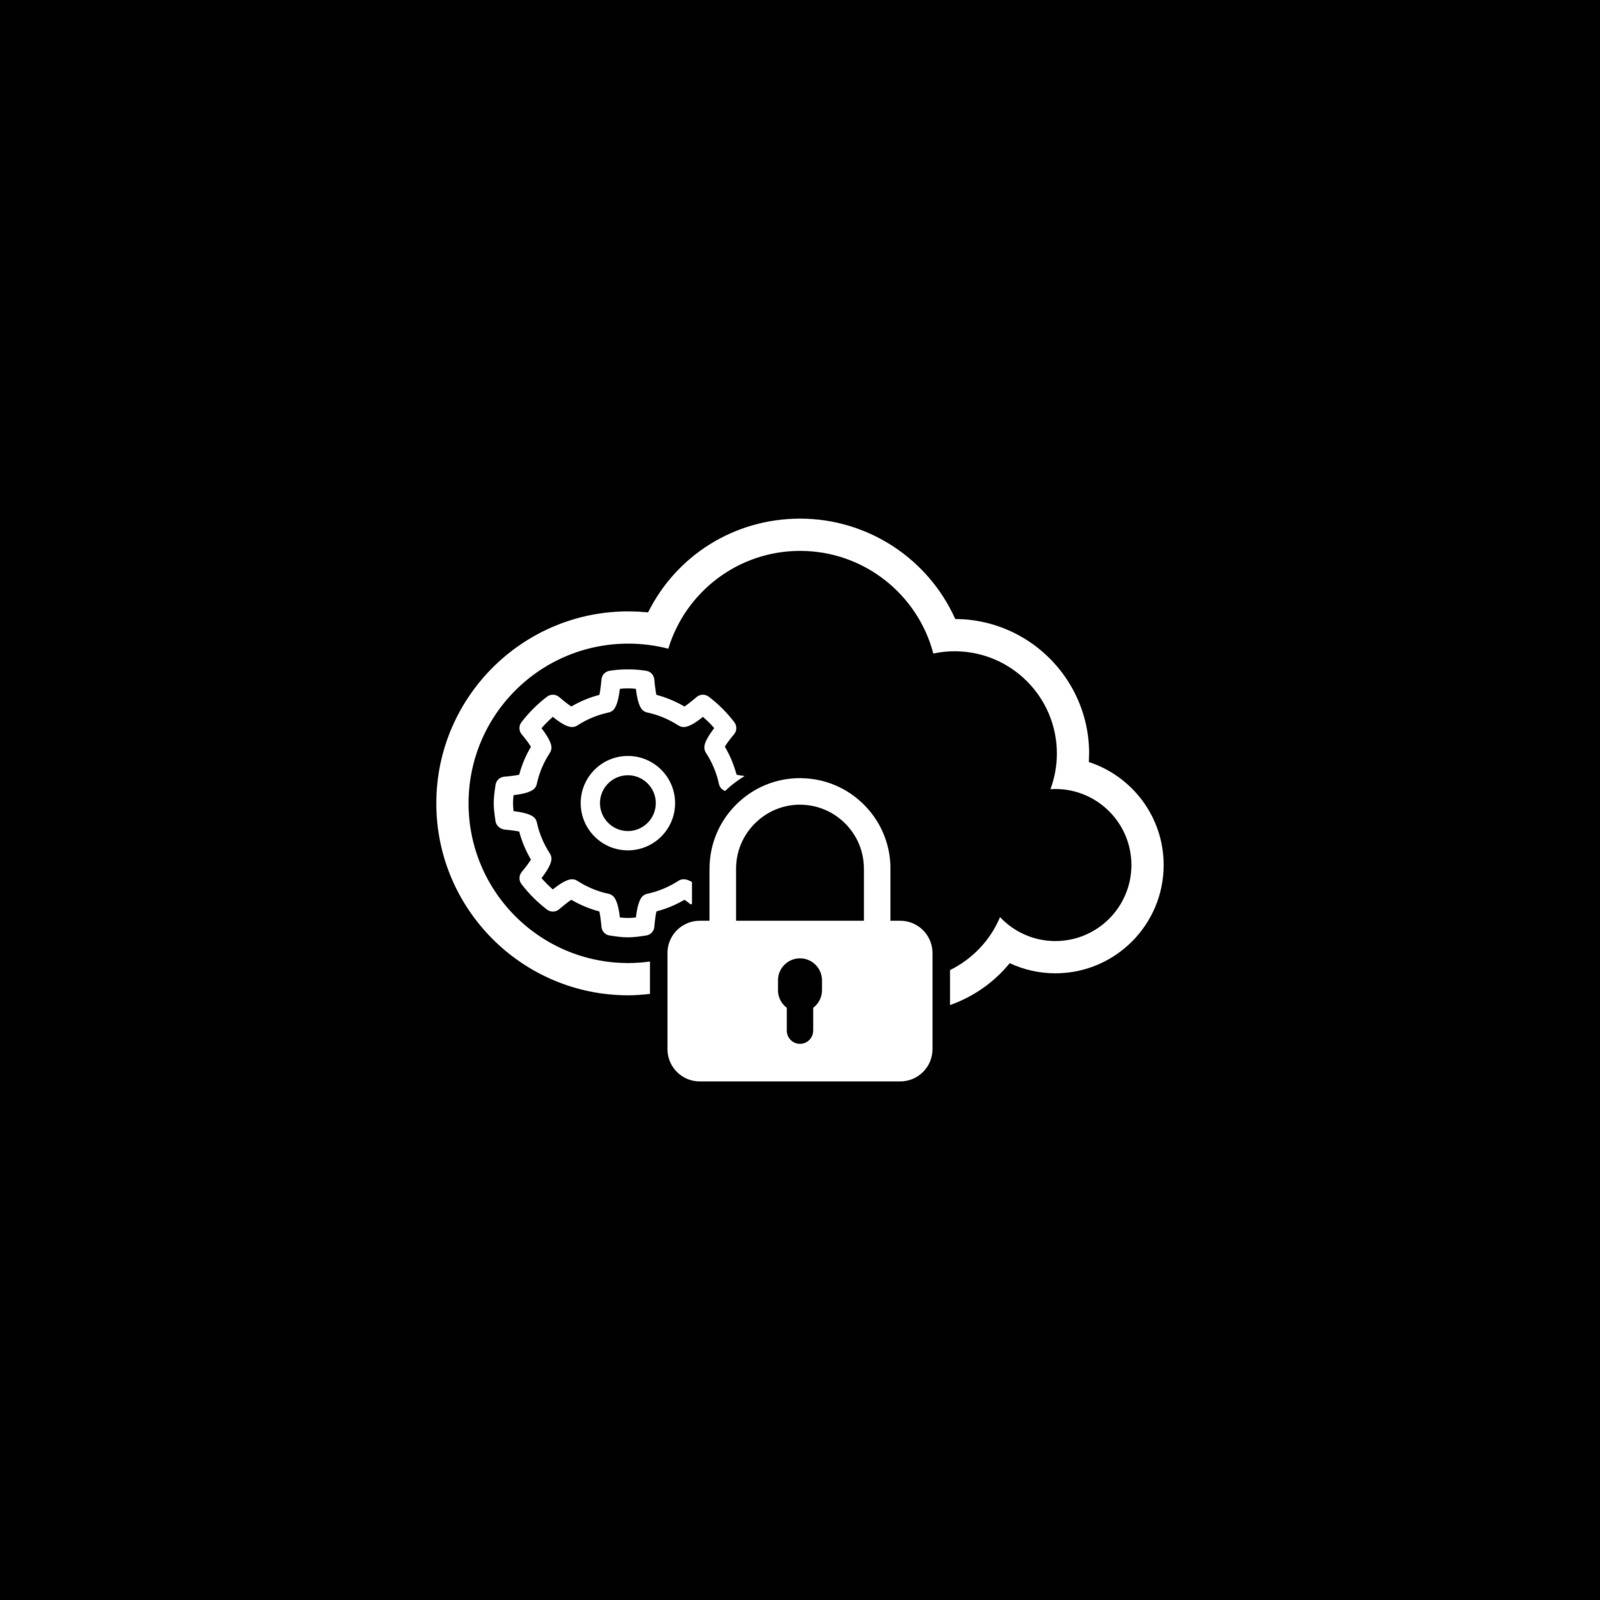 Secured Cloud Processing Icon. Flat Design. by WaD